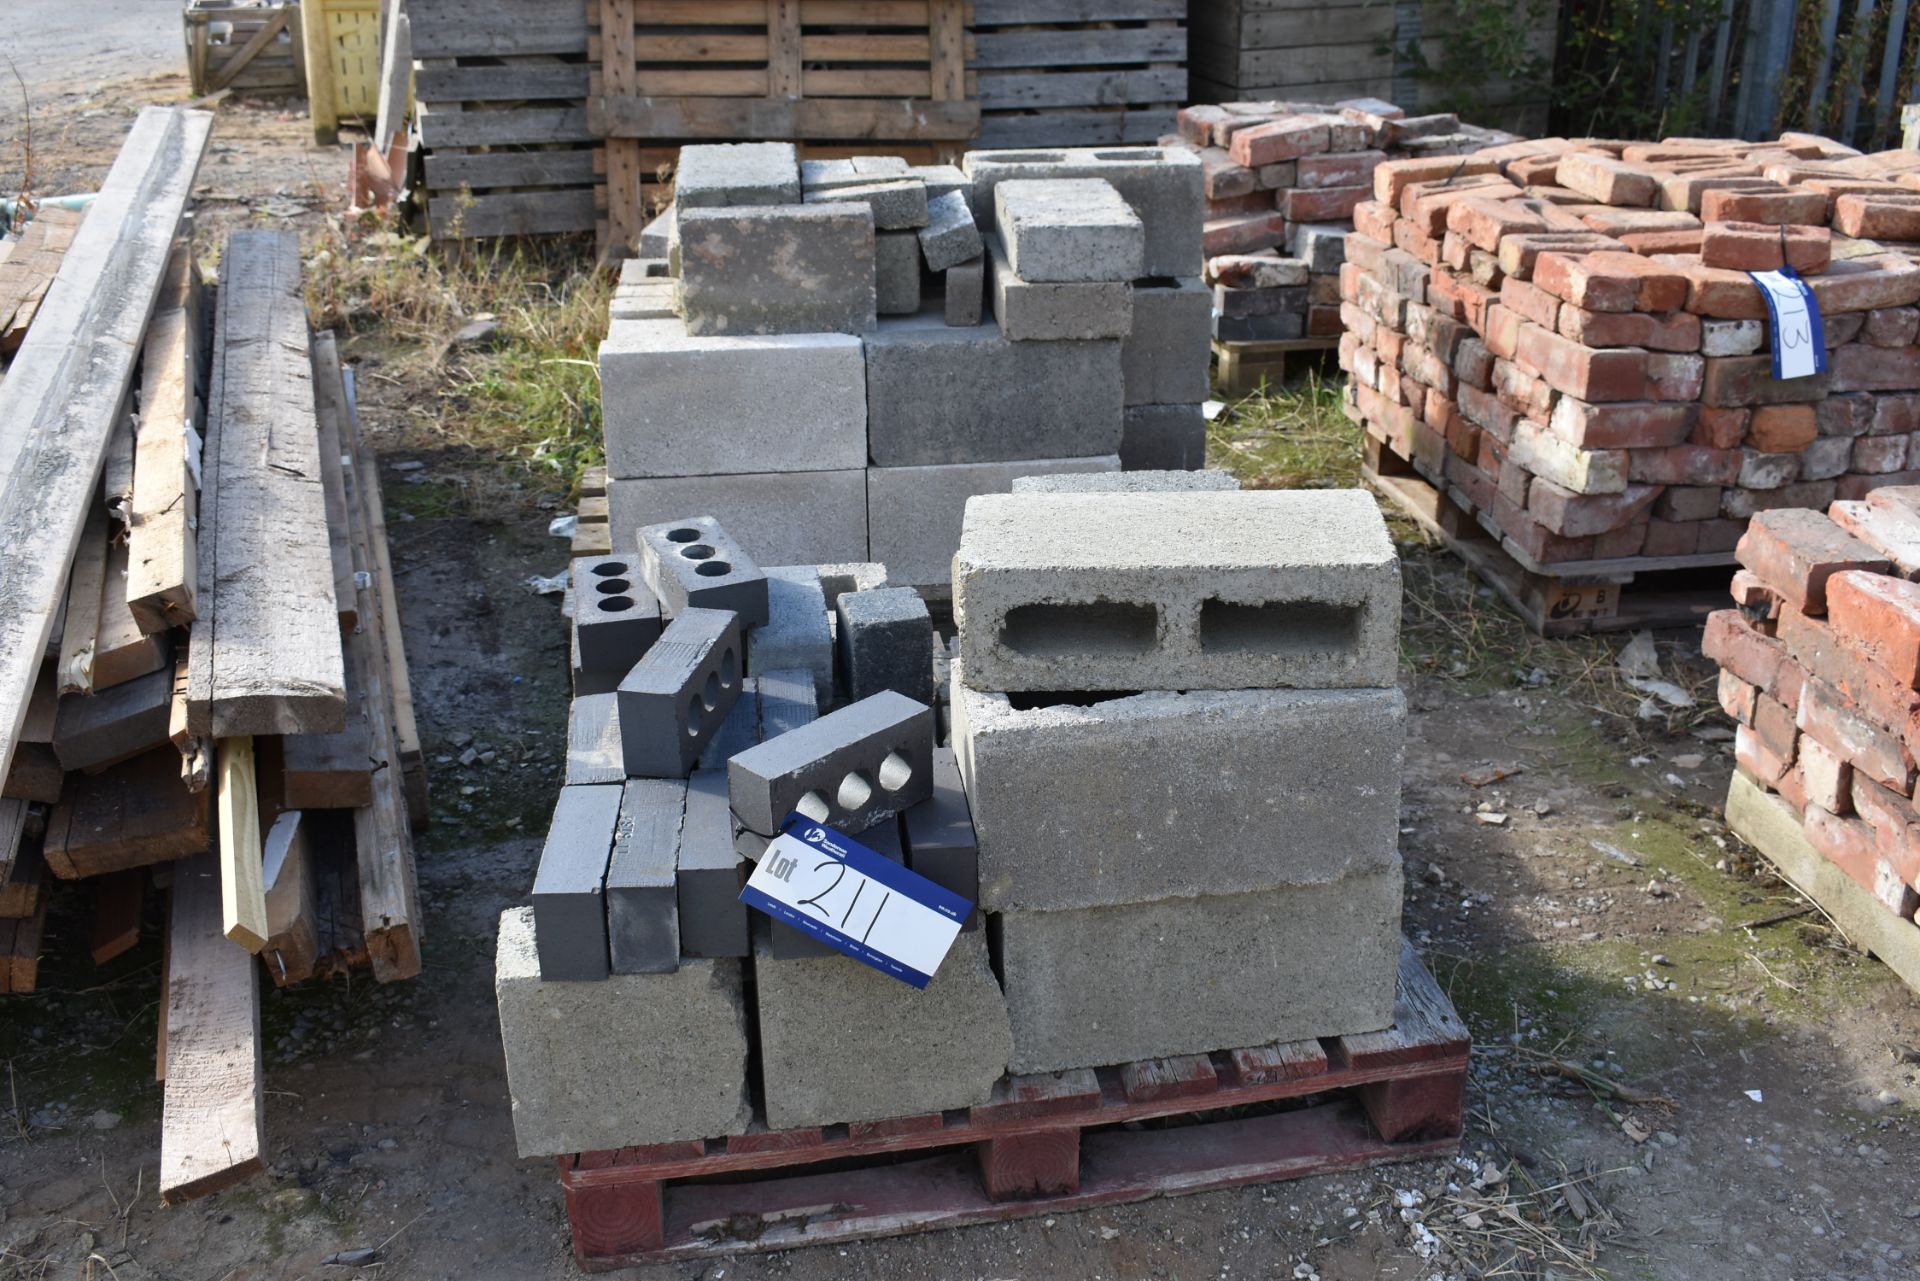 Breeze Blocks, as set out on two pallets